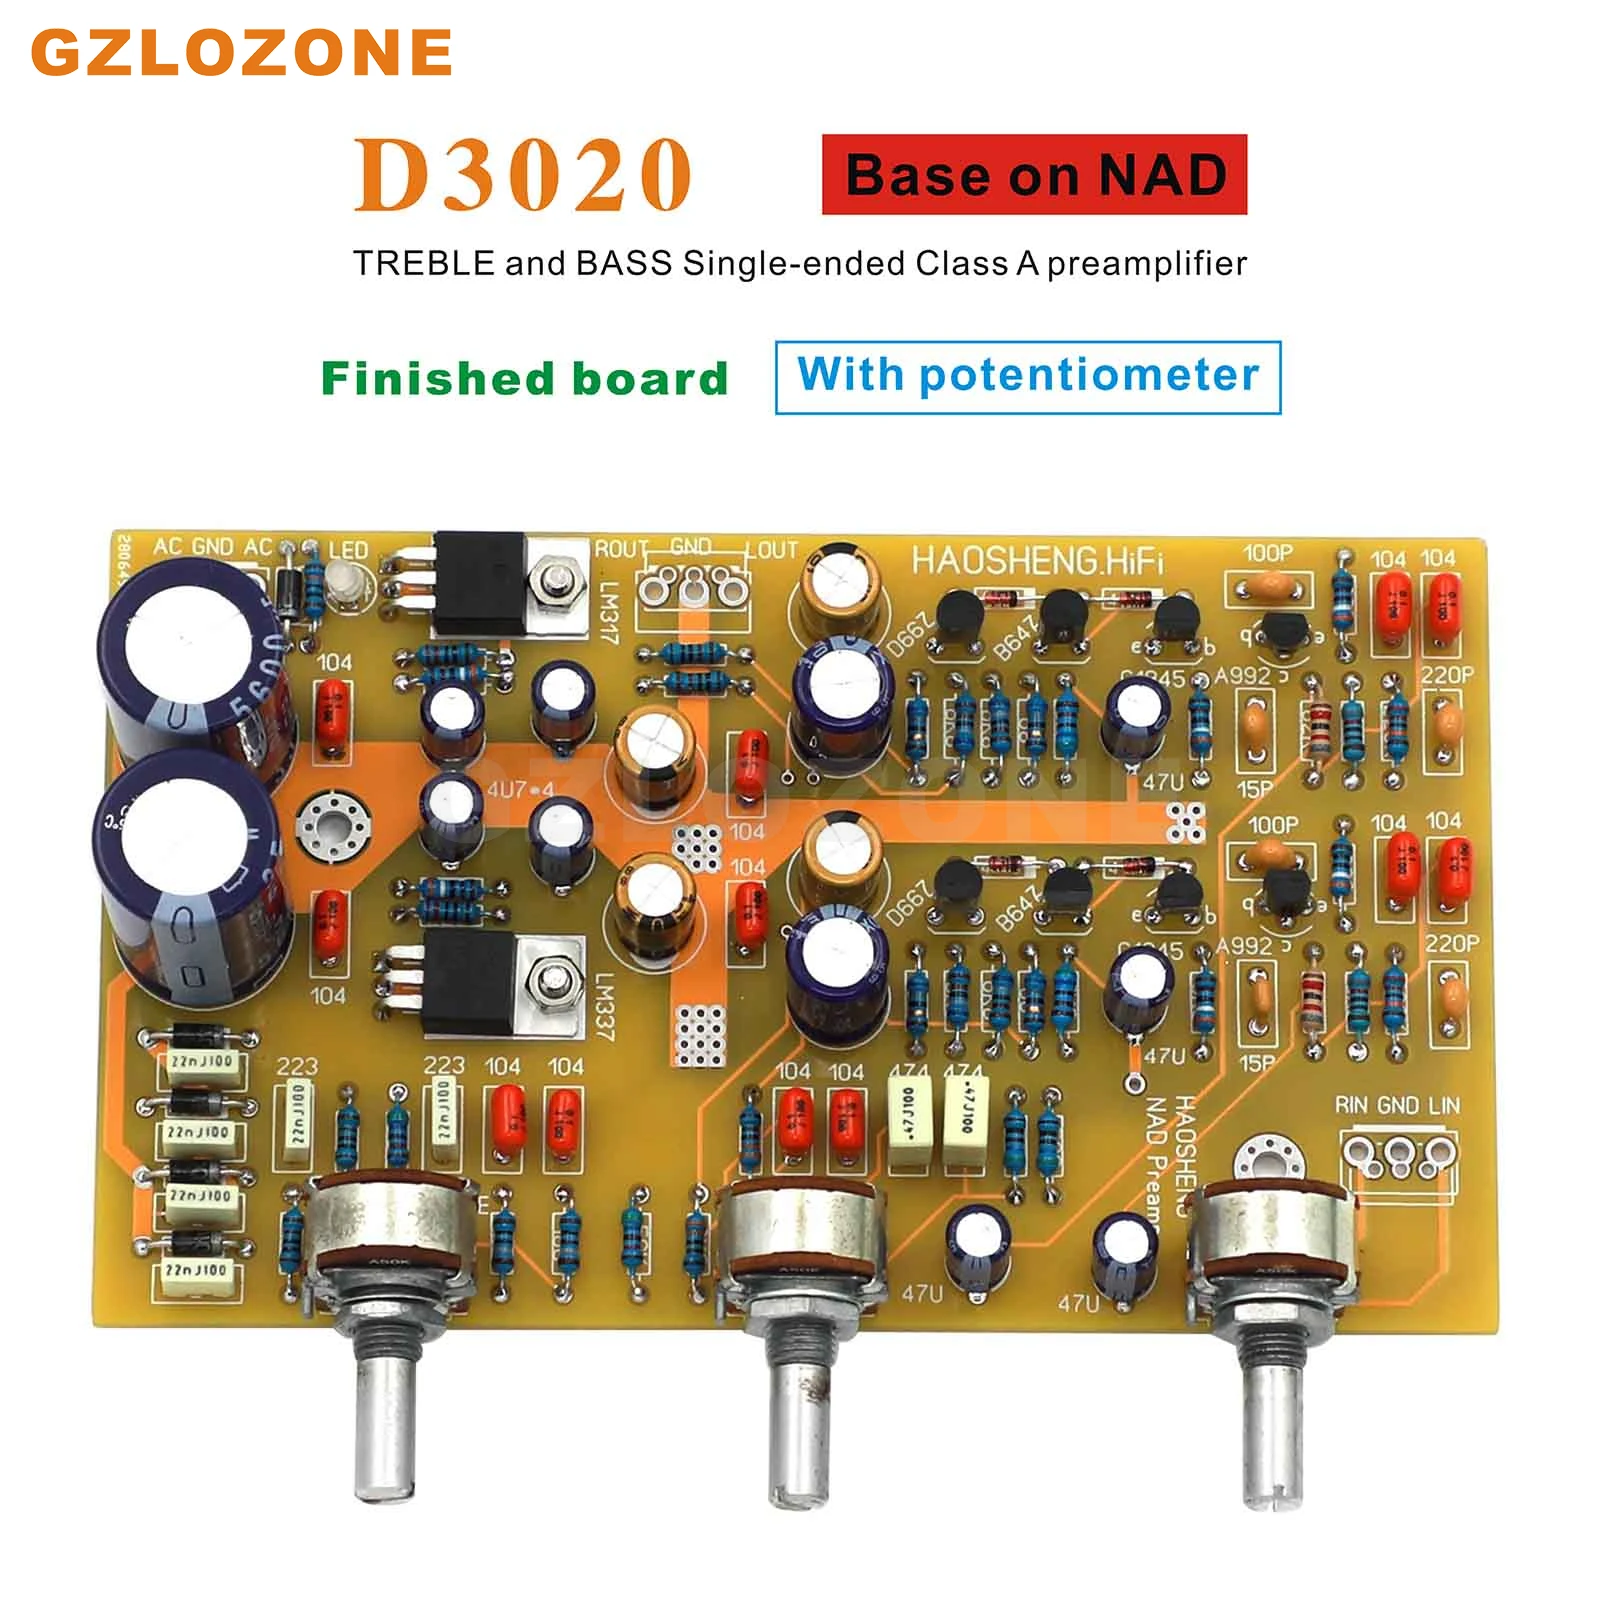 

D3020 TREBLE and BASS Single-ended Class A preamplifier Base on NAD3020 circuit DIY Kit/Finished board